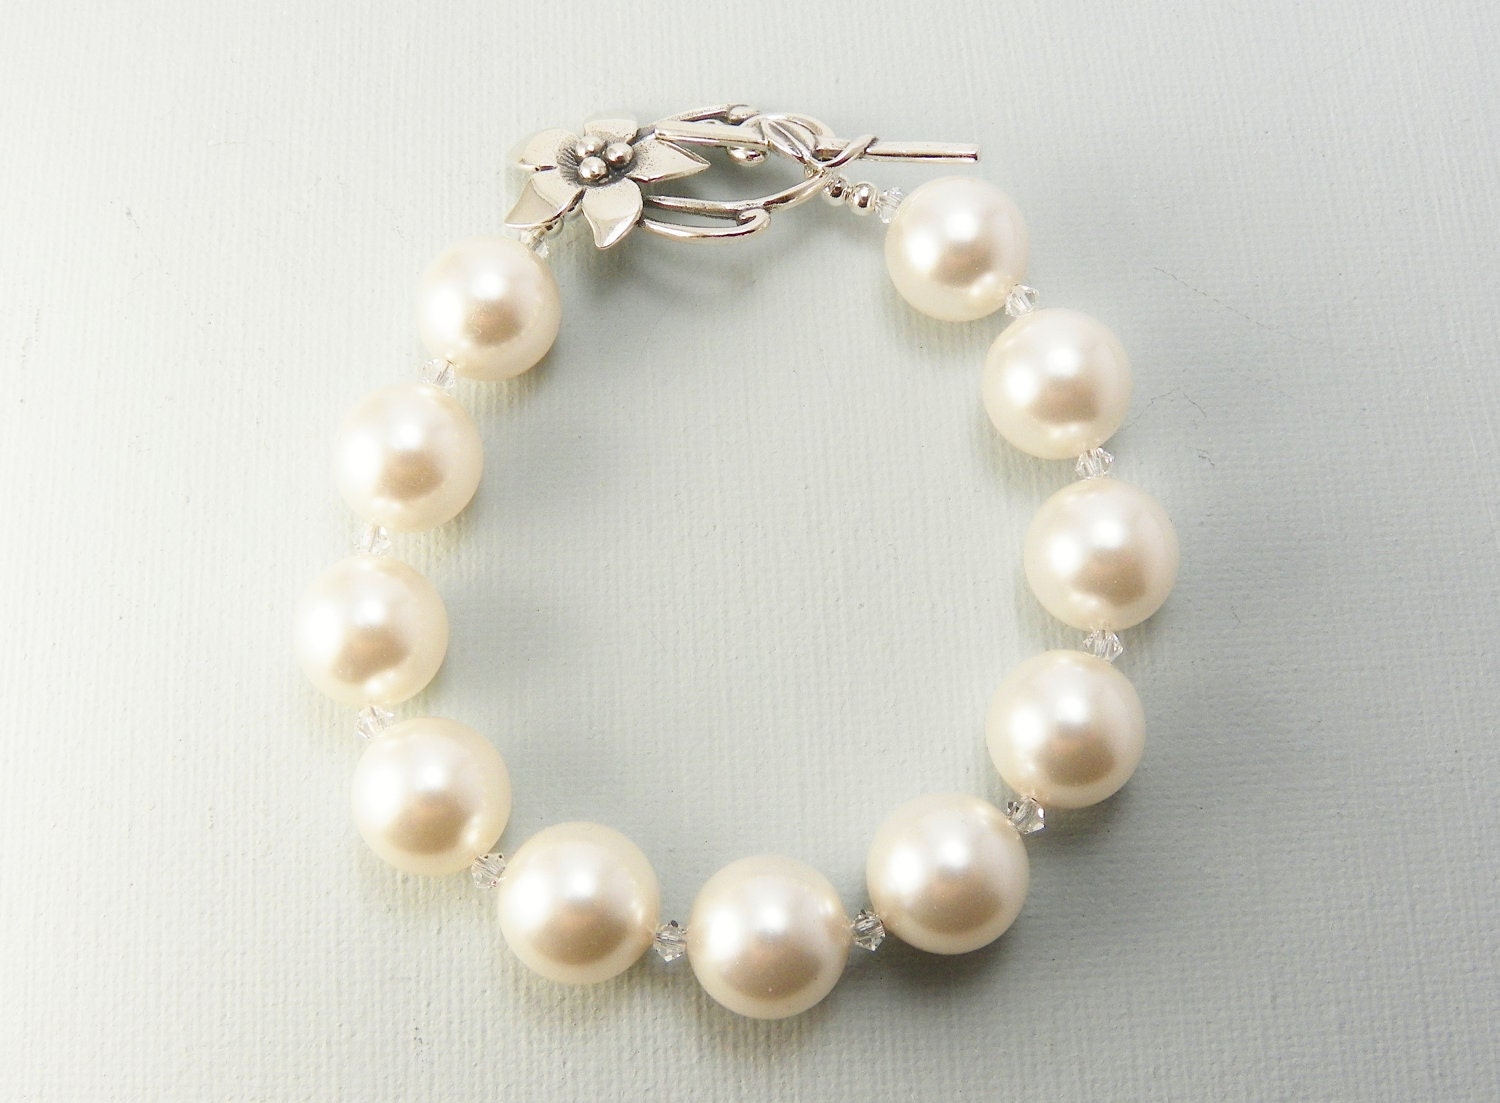 Summer Sale  20%  Discount  White Swarovski Pearl Bracelet With Ornate Sterling Silver Clasp - JanMarieArts